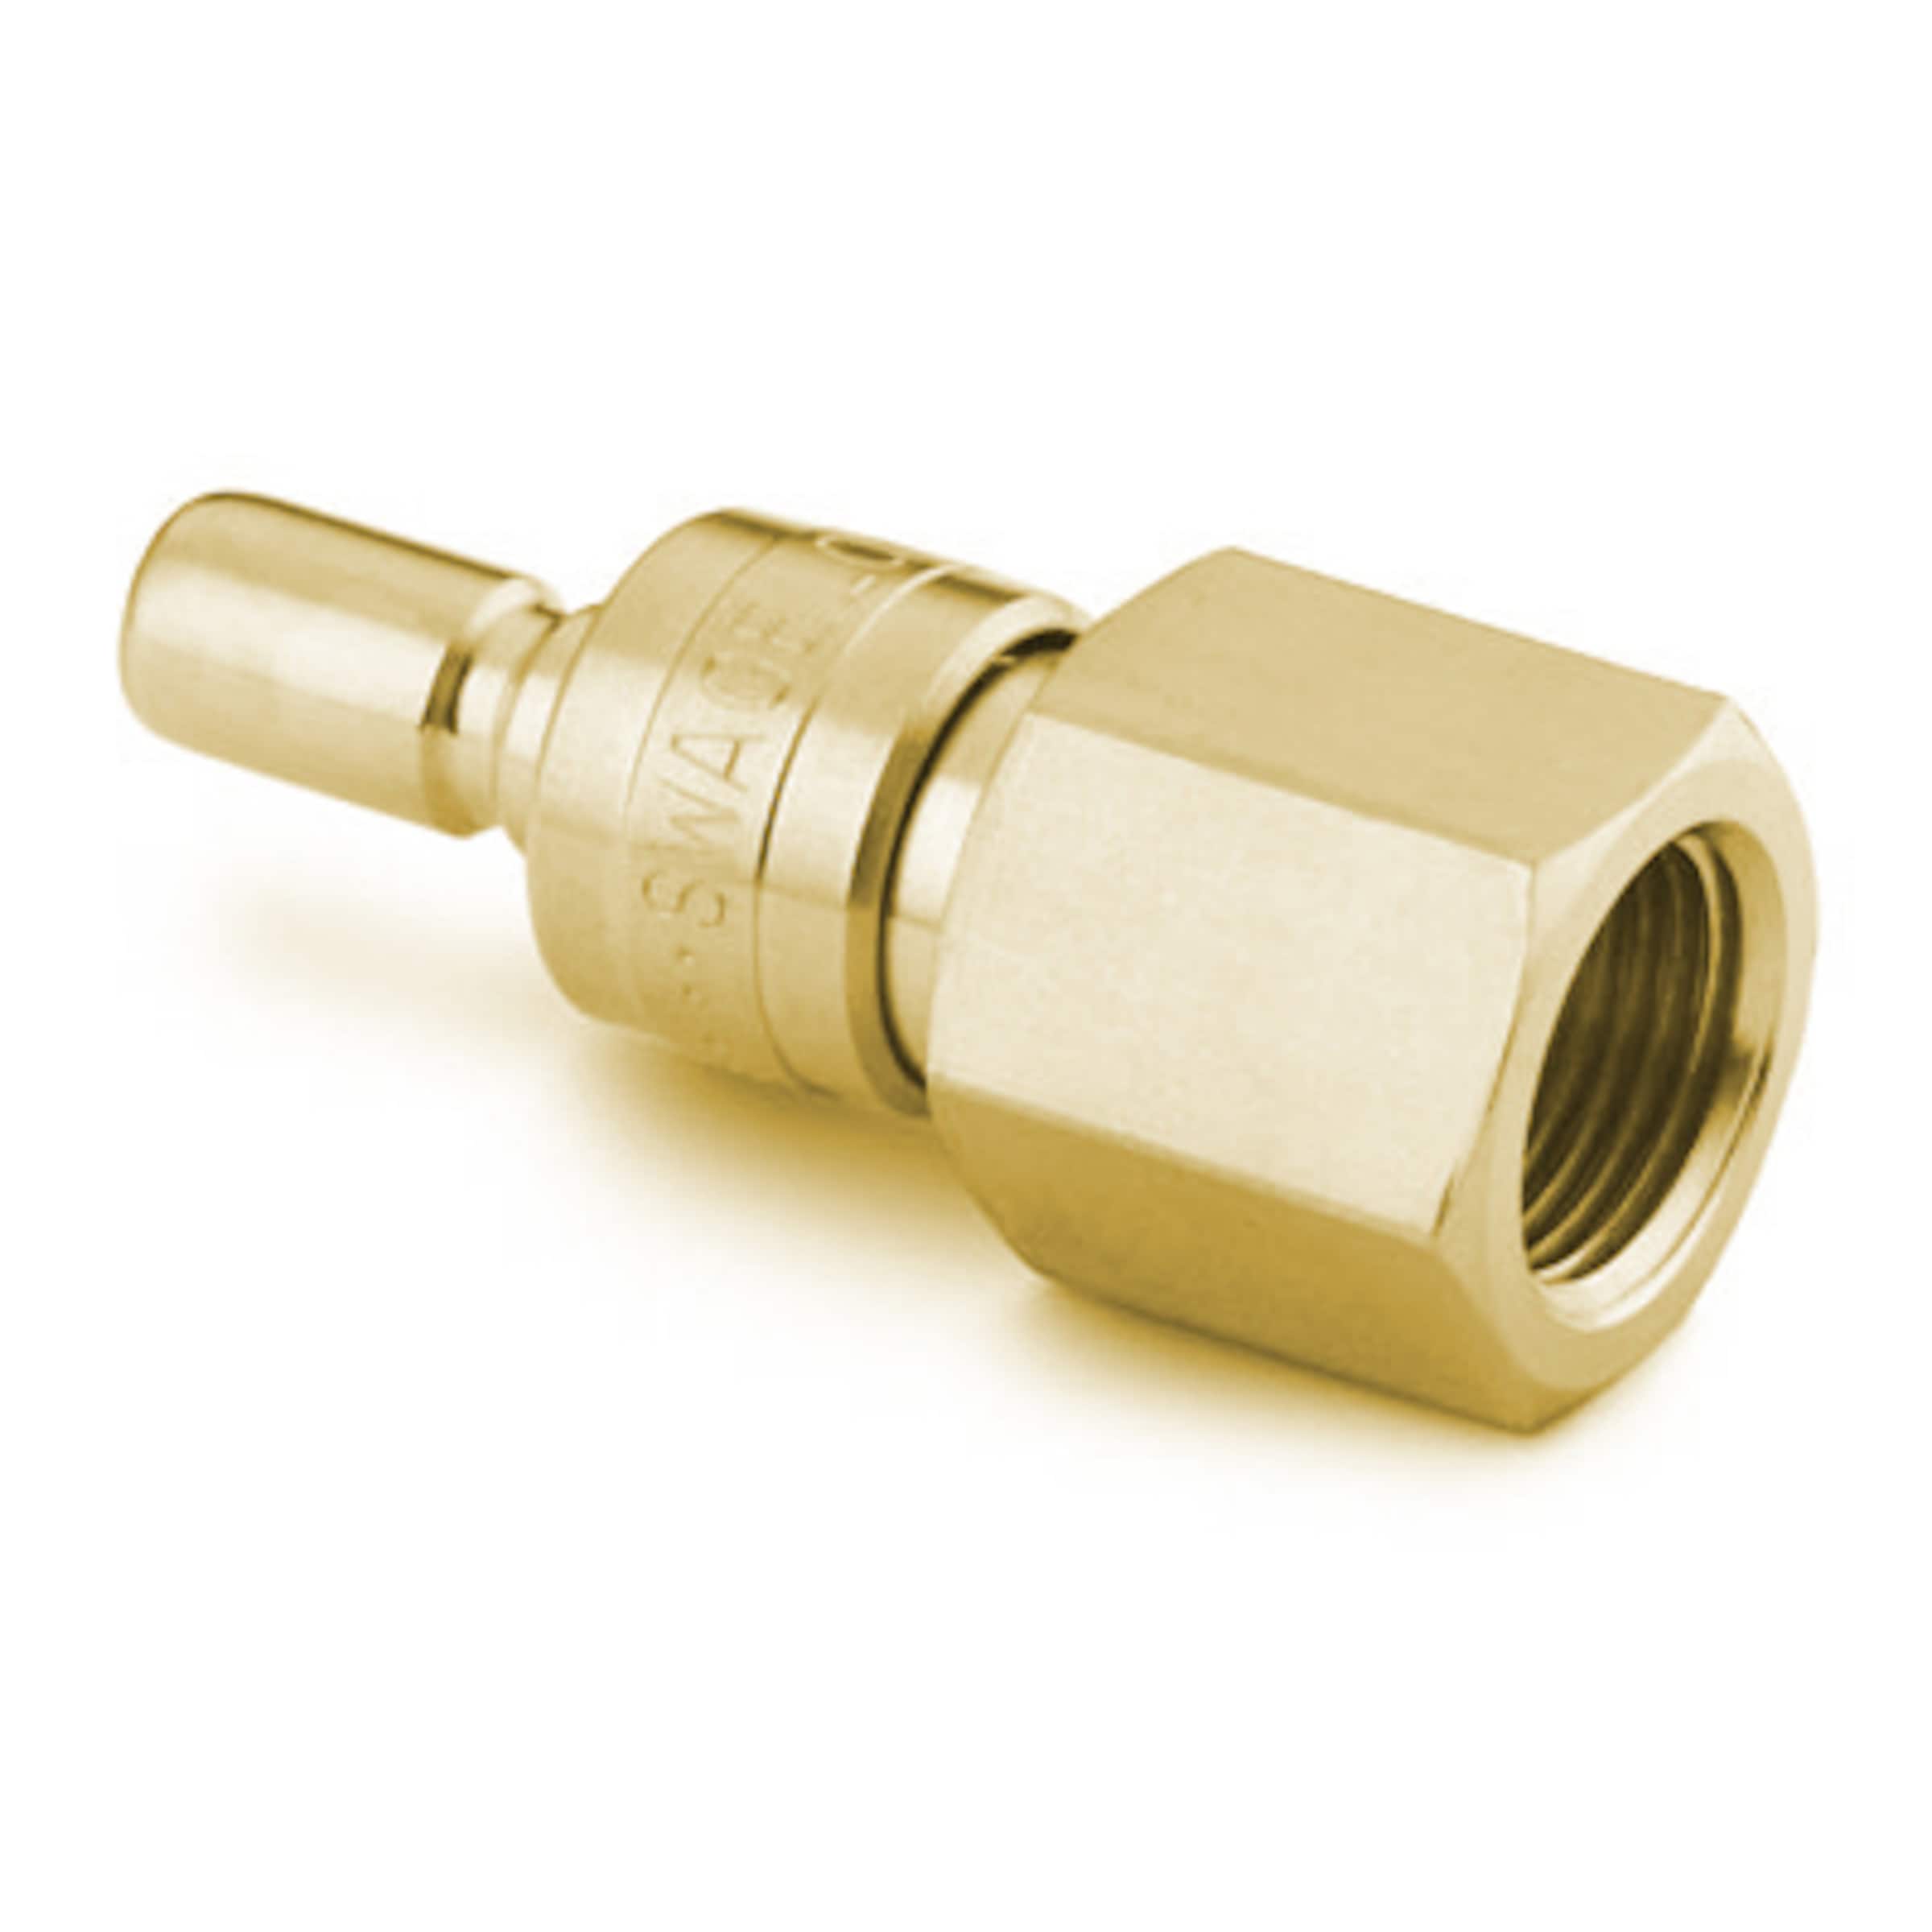 Brass Instrumentation Quick Connect Stem with Valve, 0.2 Cv, 1/4 in.  Swagelok Tube Fitting, Instrumentation Quick Connects, Quick Connects, Valves, All Products